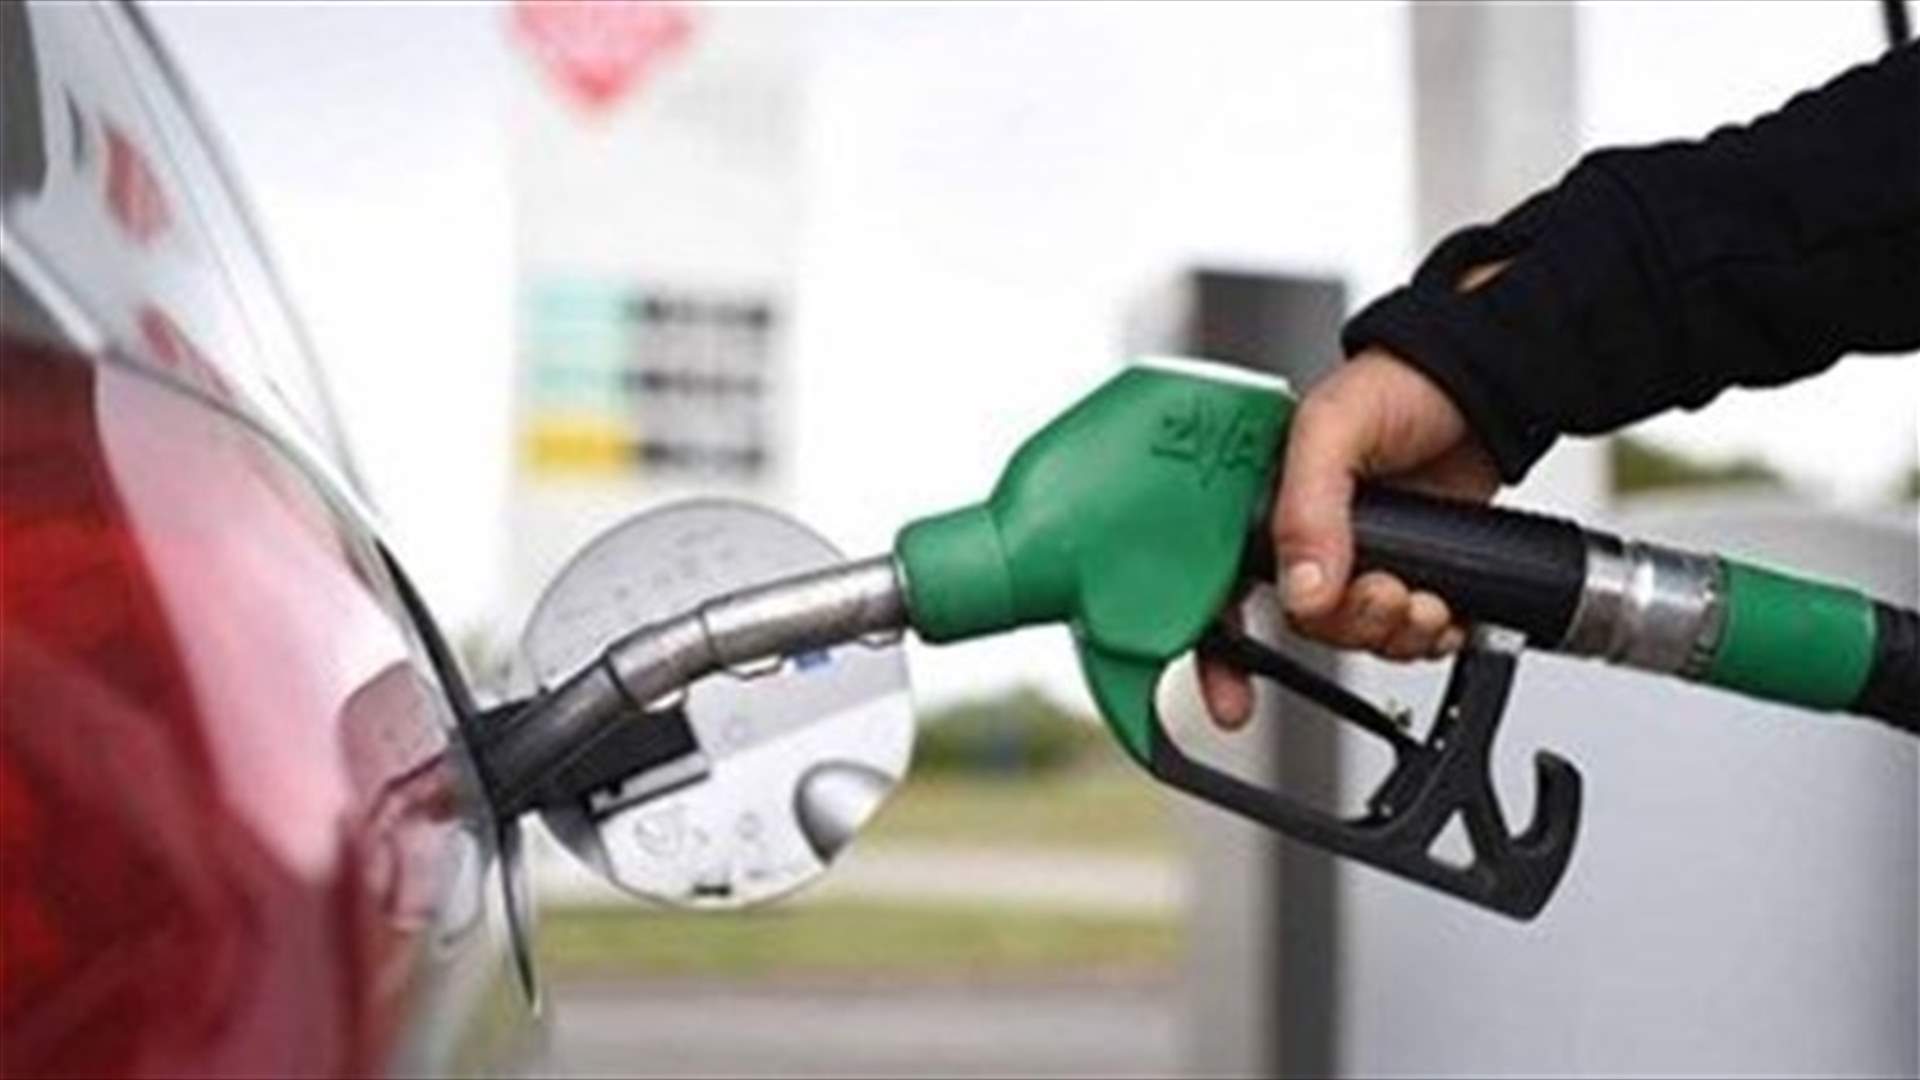 Price of 95 octane fuel increases 500 LBP